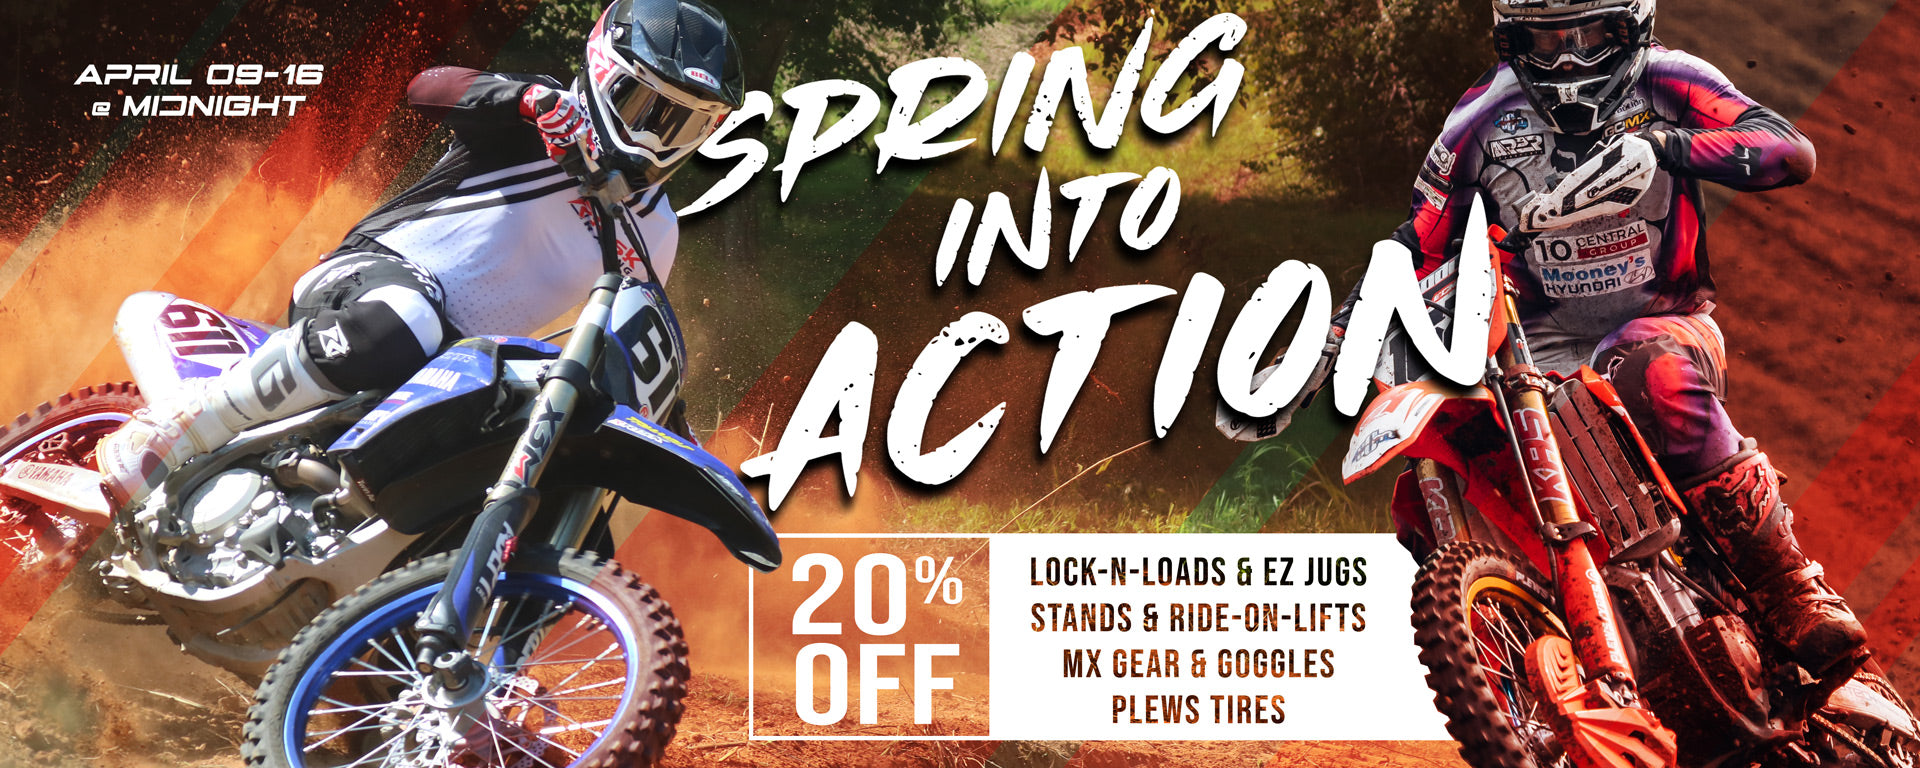 Spring into Action Sale banner. 20% off lock-n-loads, ez jugs, mx stands, gear, goggles, and tires